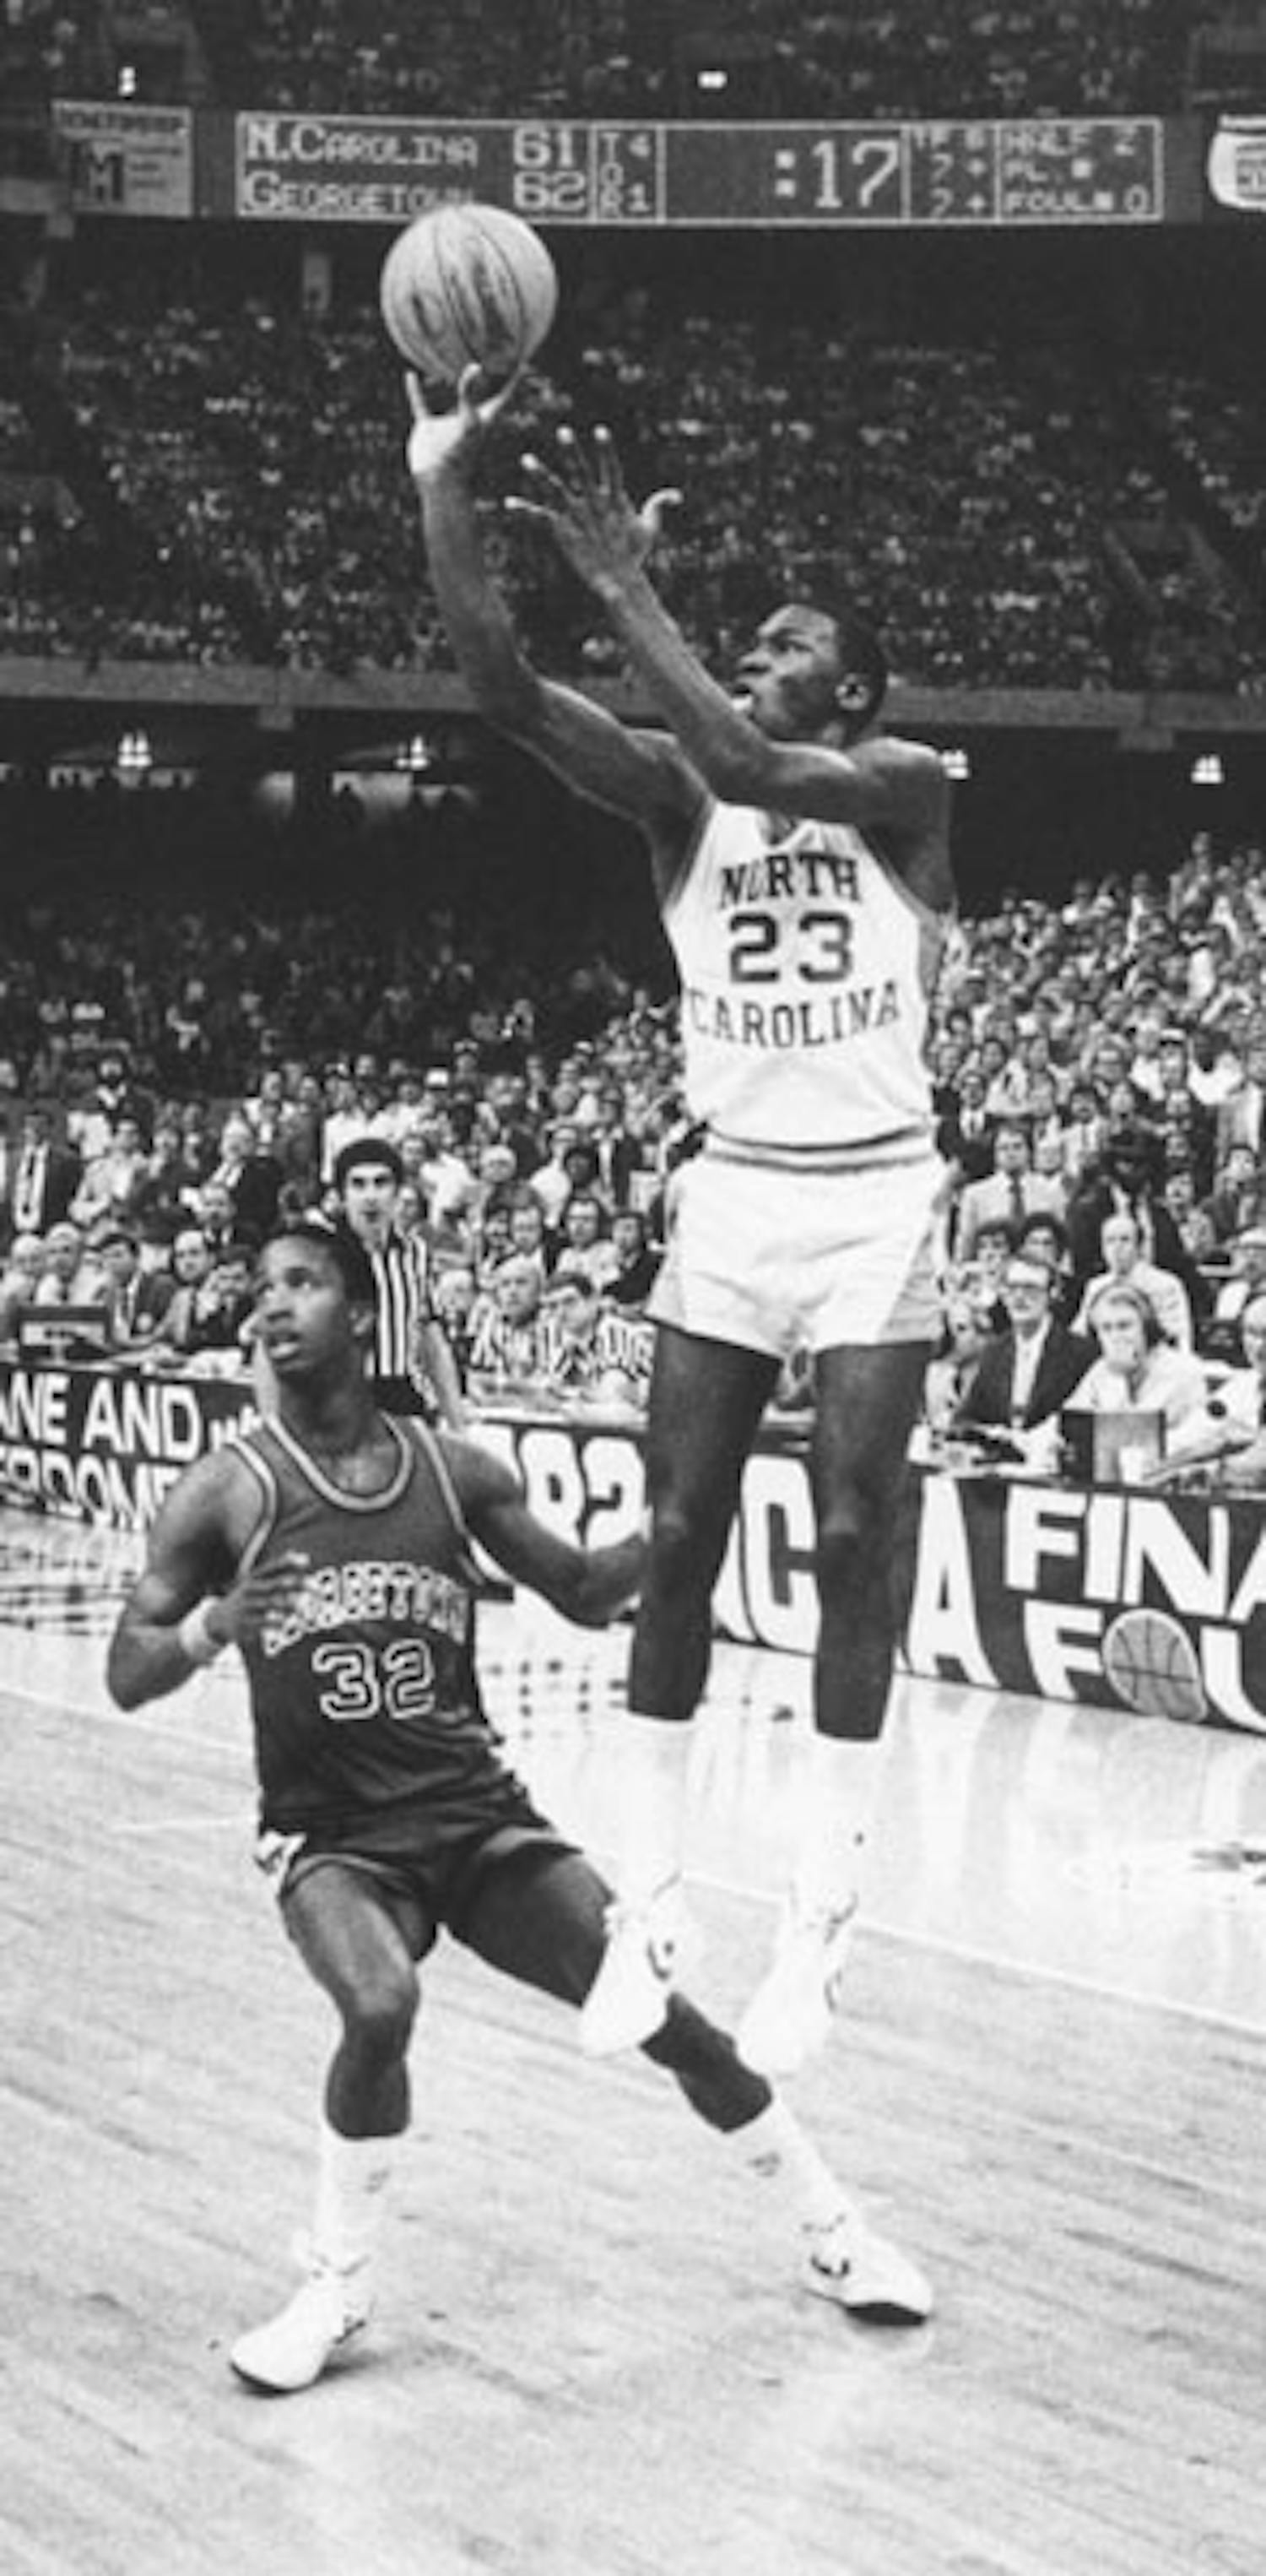 First-year Michael Jordan made his mark on UNC basketball by hitting the game-winning shot in the 1982 championship game. DTH File